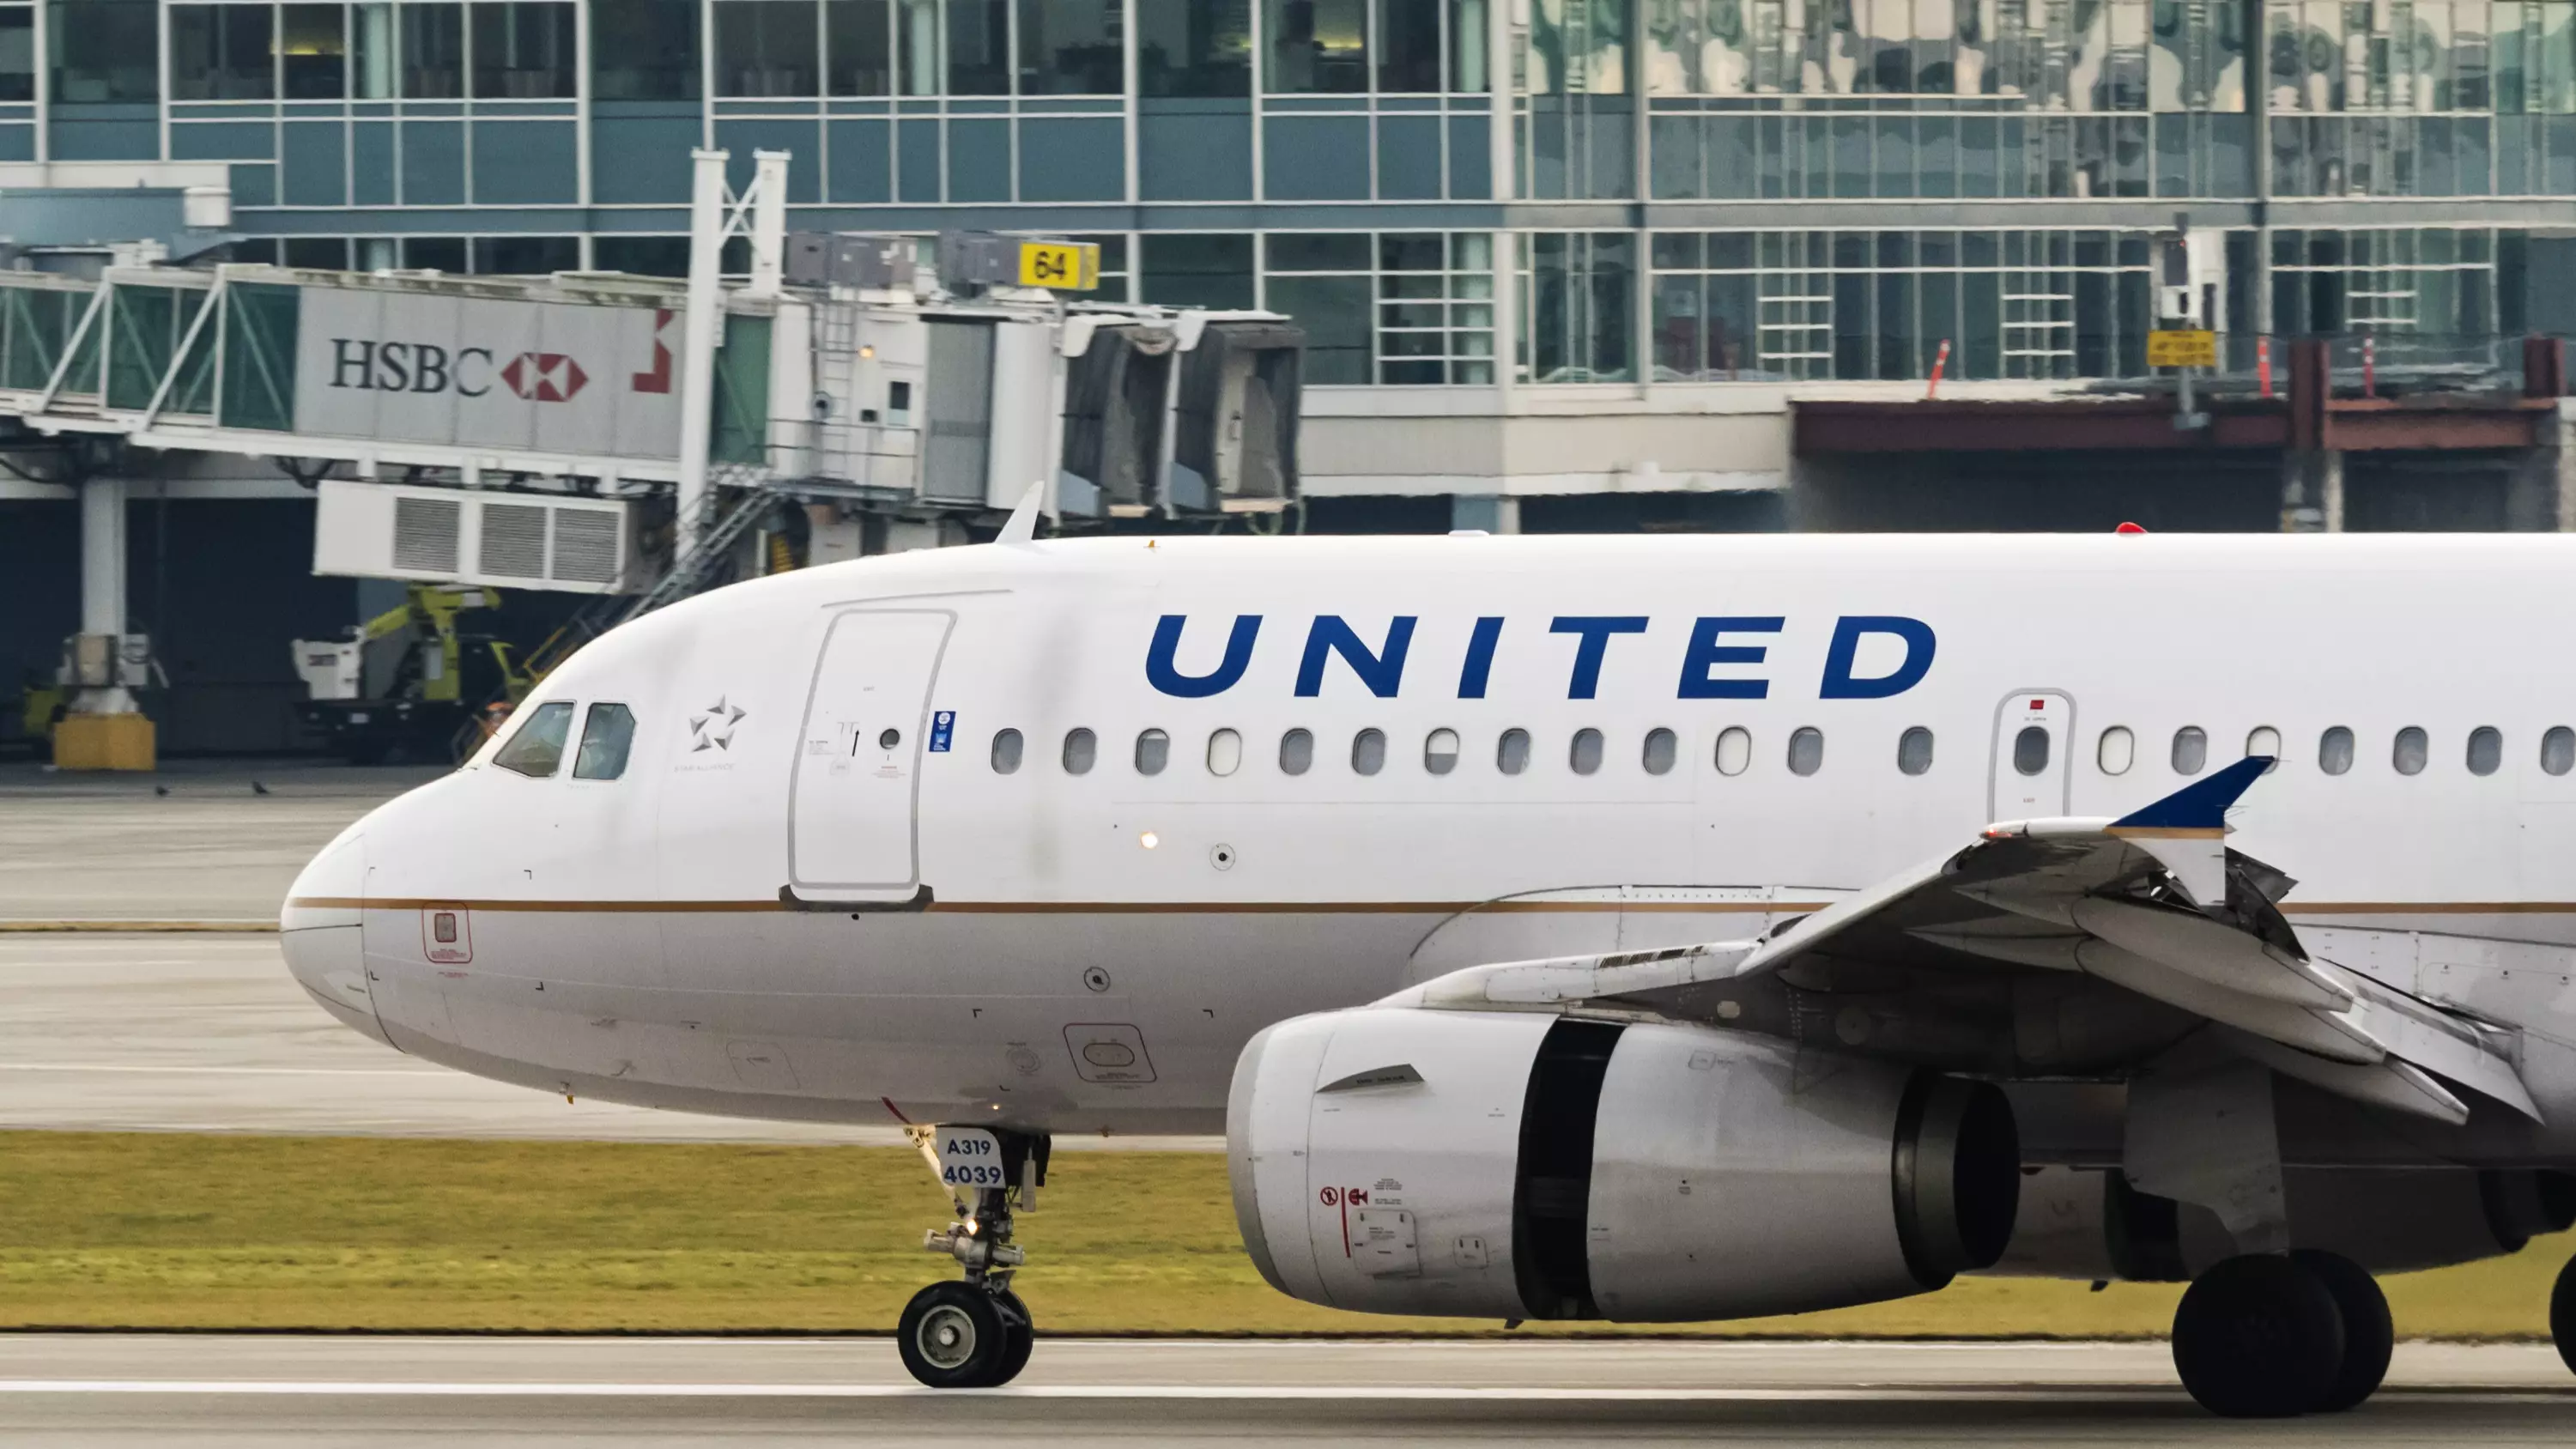 Dog Dies On Board United Airlines Plane After Being Placed In Overhead Locker 